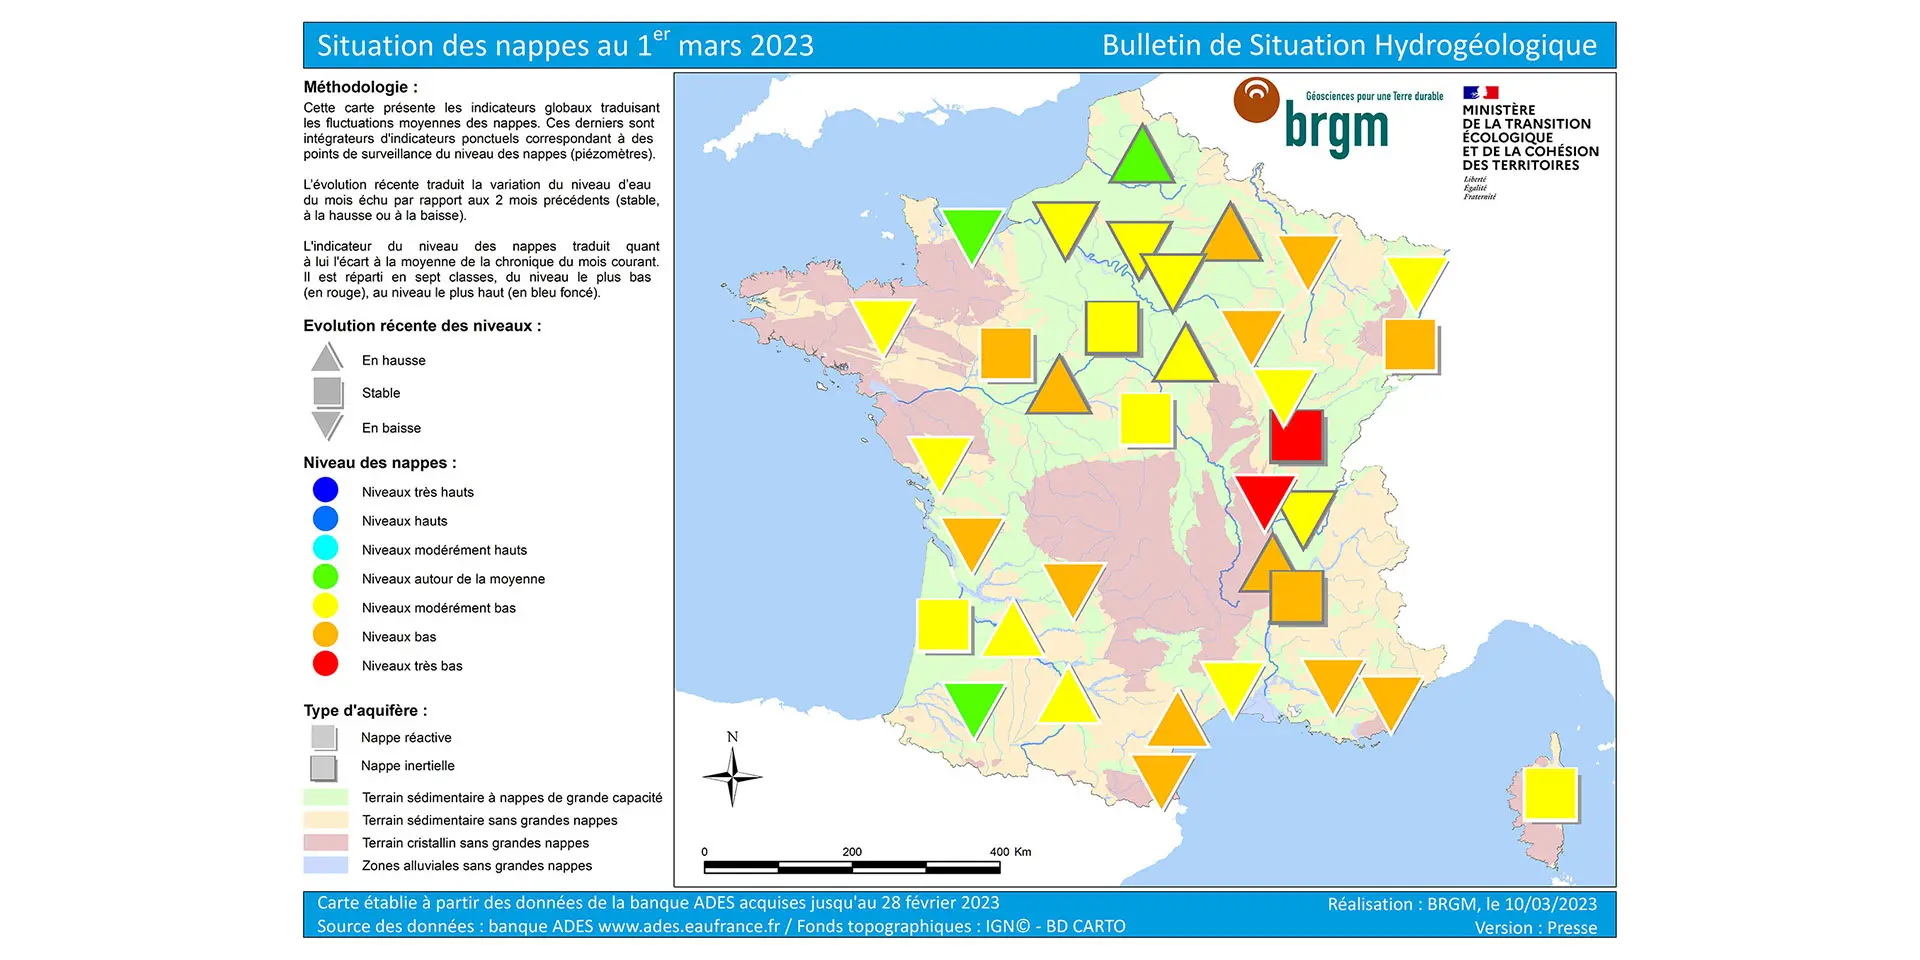 Map of France of the situation of aquifers on 1 March 2023.